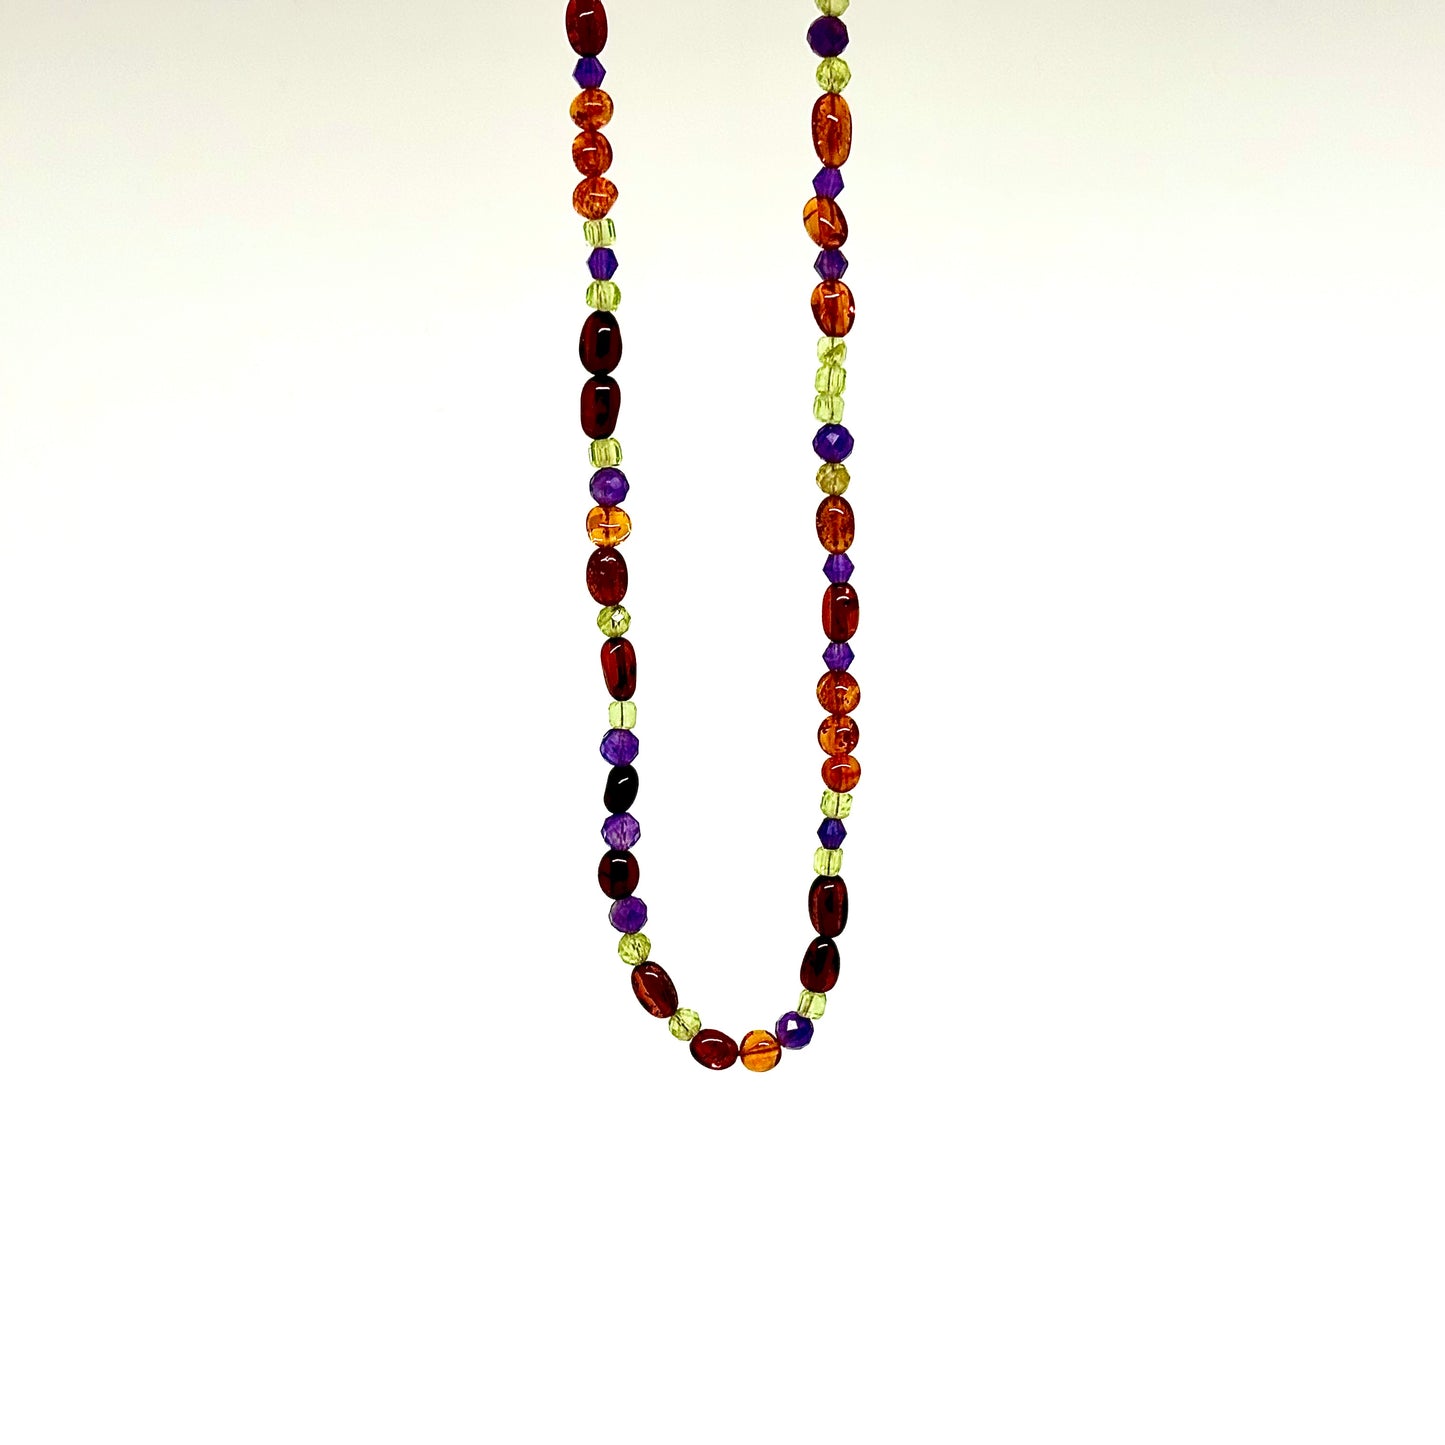 Handmade One of a Kind Multi Color Baltic Amber, Peridot and Amethyst Bead Necklace